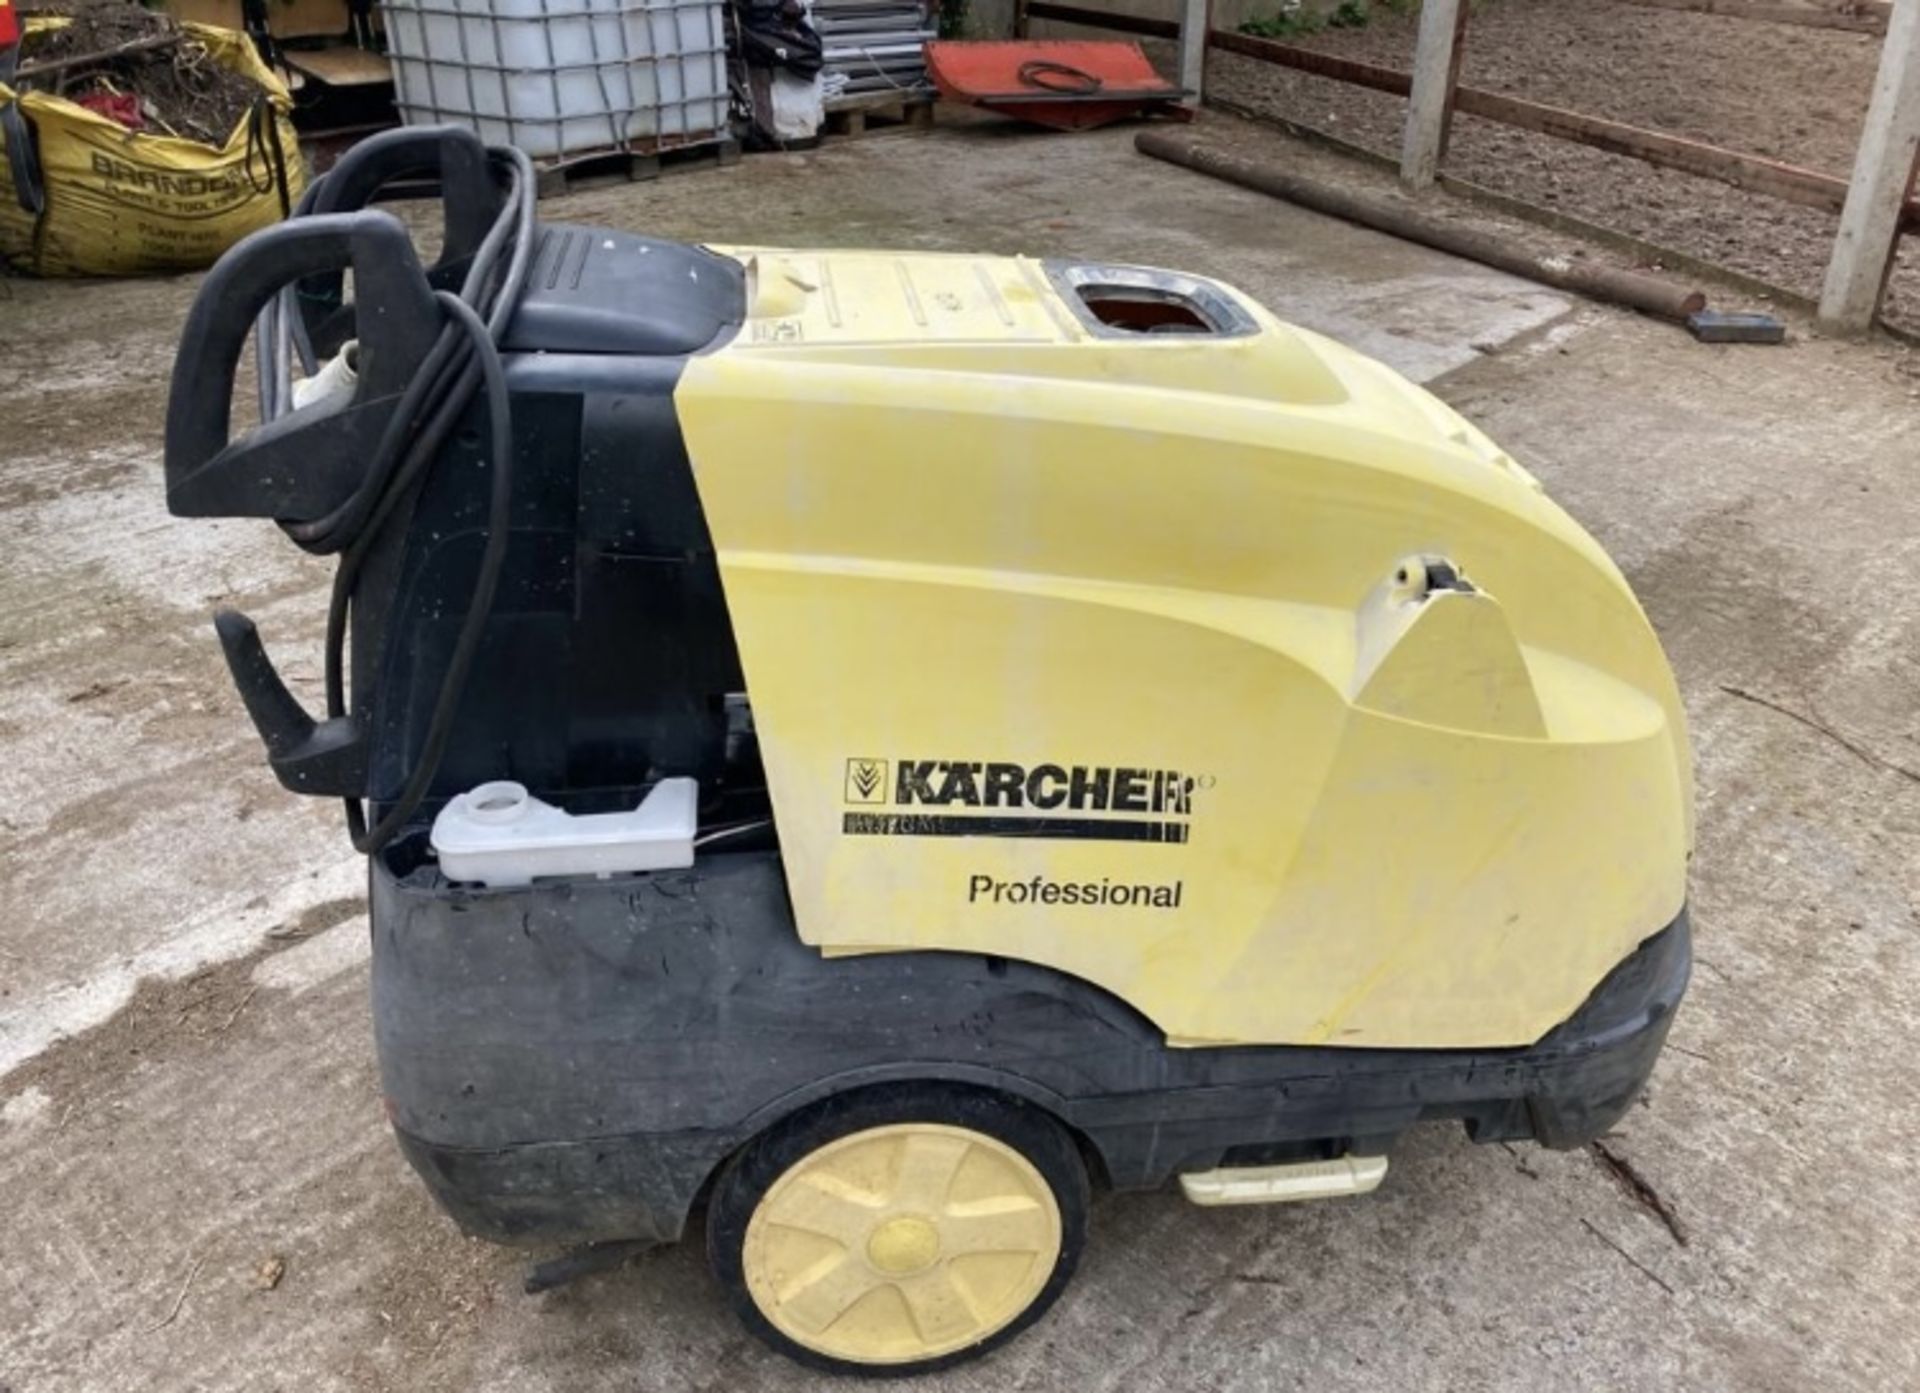 KARCHER PROFESSIONAL POWER WASHER LOCATION NORTHERN IRELAND. - Image 2 of 2